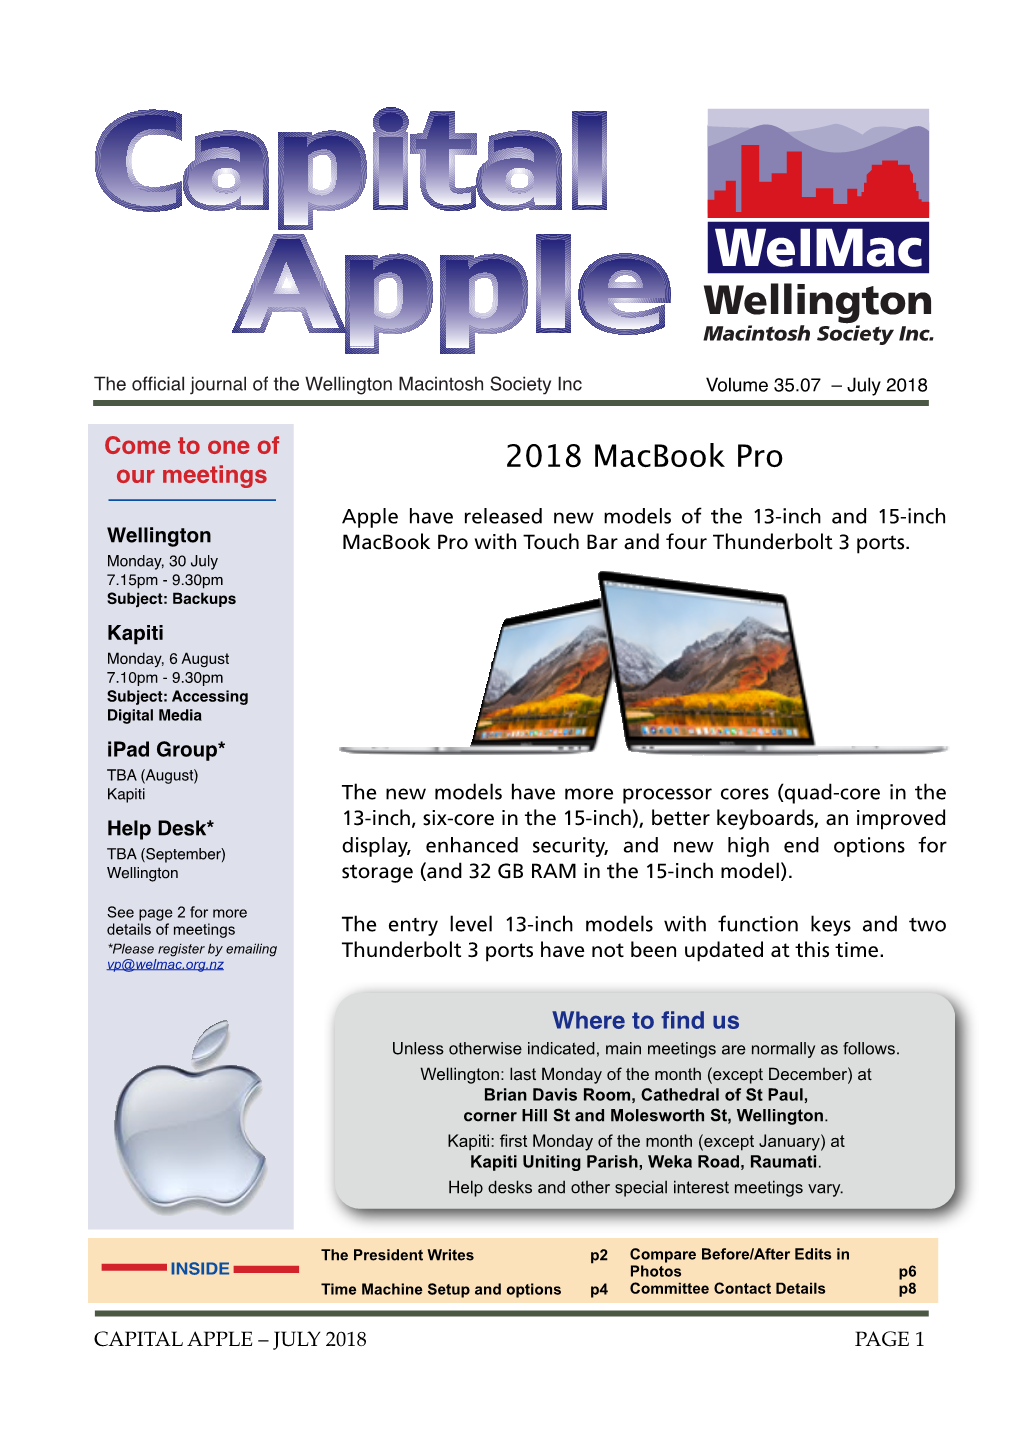 2018 Macbook Pro Our Meetings Apple Have Released New Models of the 13-Inch and 15-Inch Wellington Macbook Pro with Touch Bar and Four Thunderbolt 3 Ports